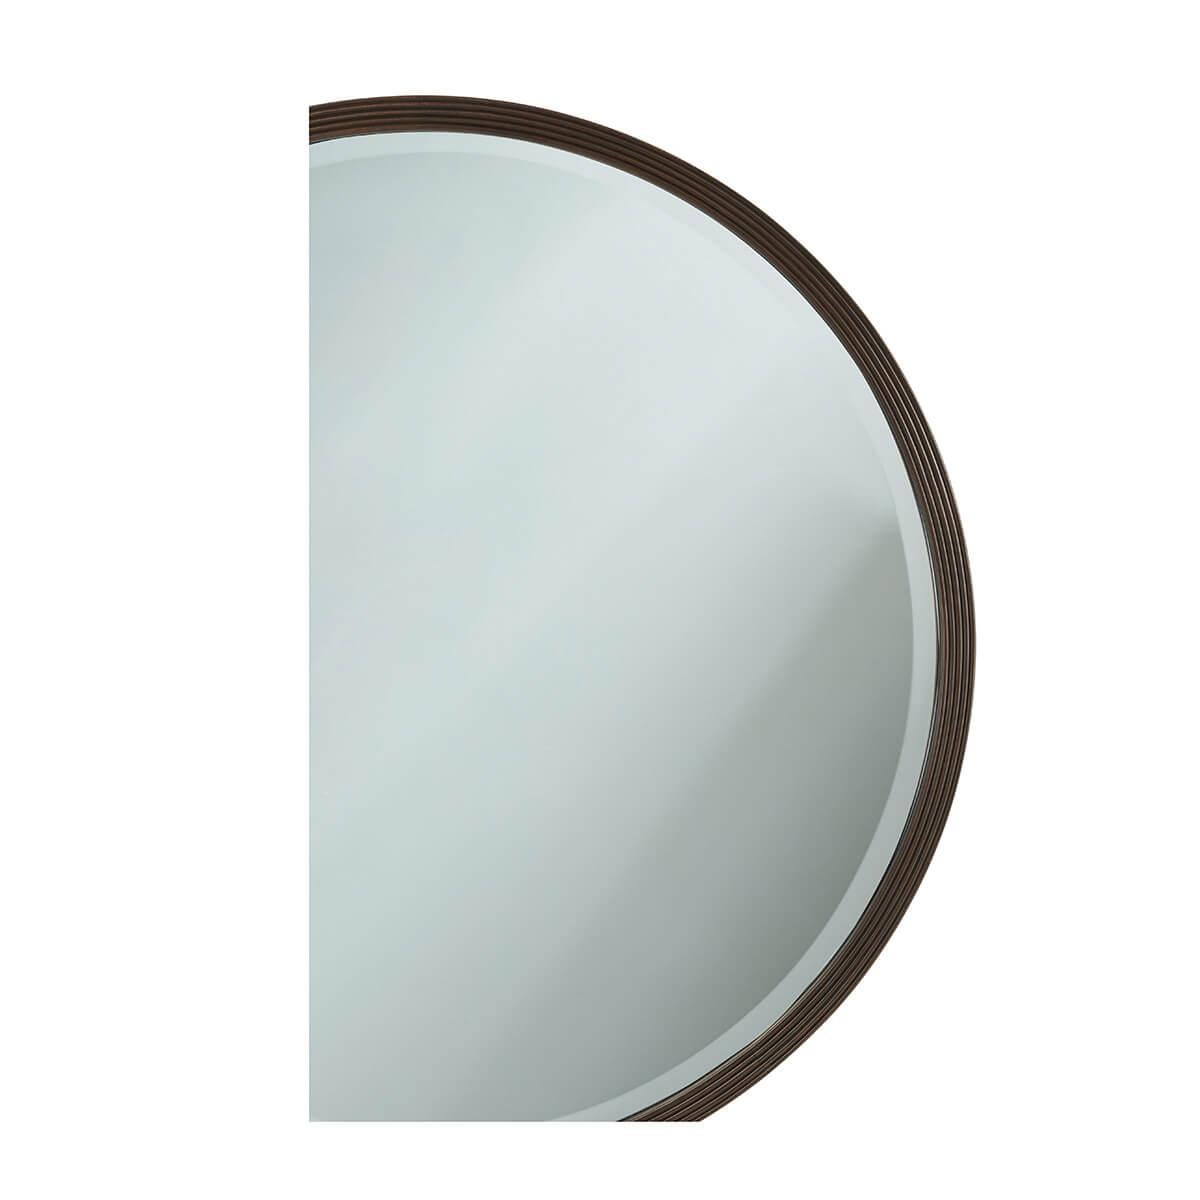  A modern mirror with a reeded frame in our dark Bistre finish with a beveled glass mirror plate.
Dimensions: 36